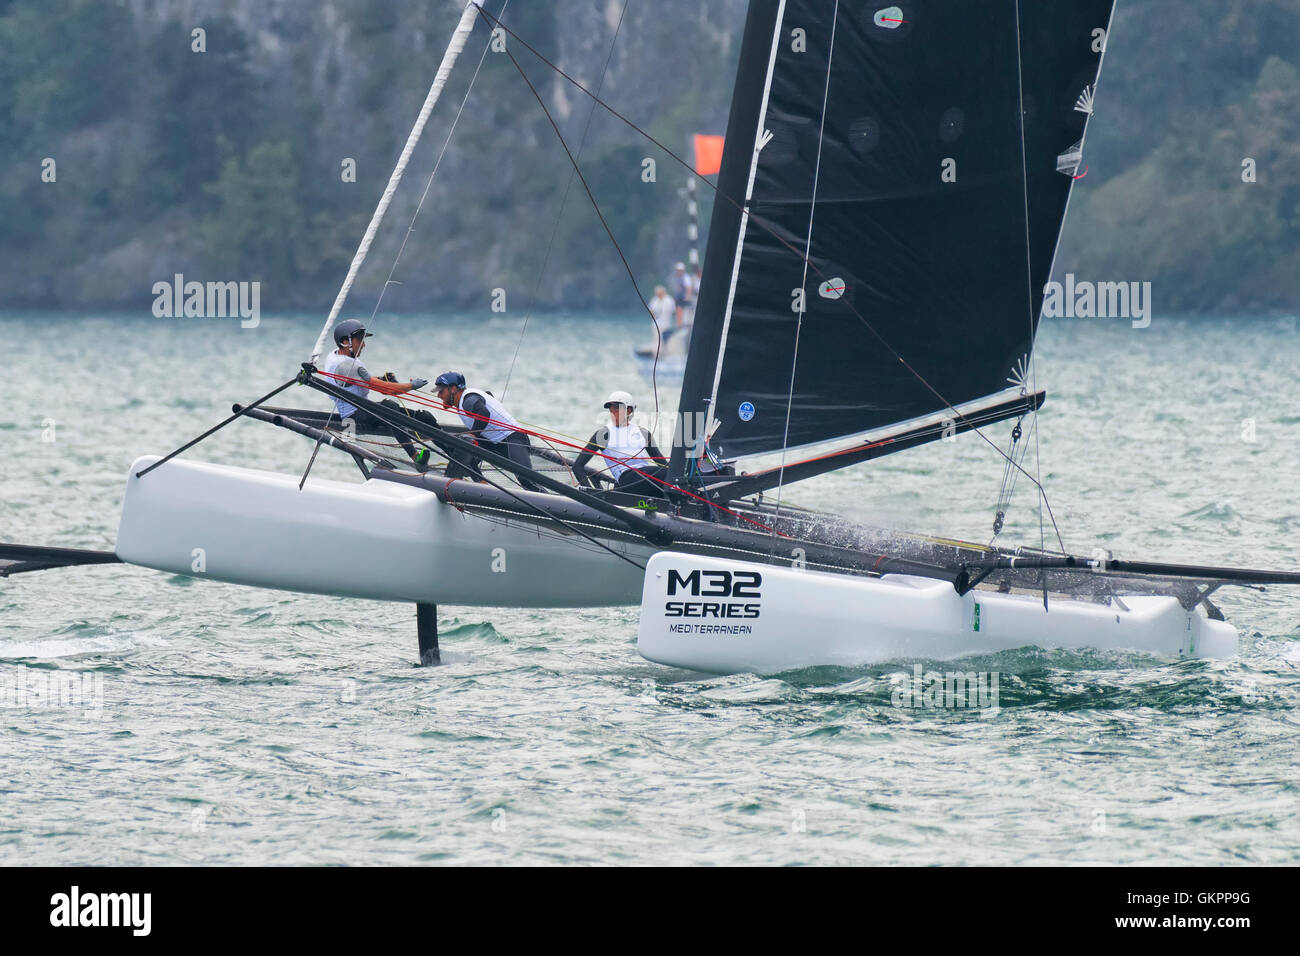 RIVA DEL GARDA, ITALY - AUGUST 19: first day of competition for M32 series mediterranean, a sailing fast catamaran competition o Stock Photo